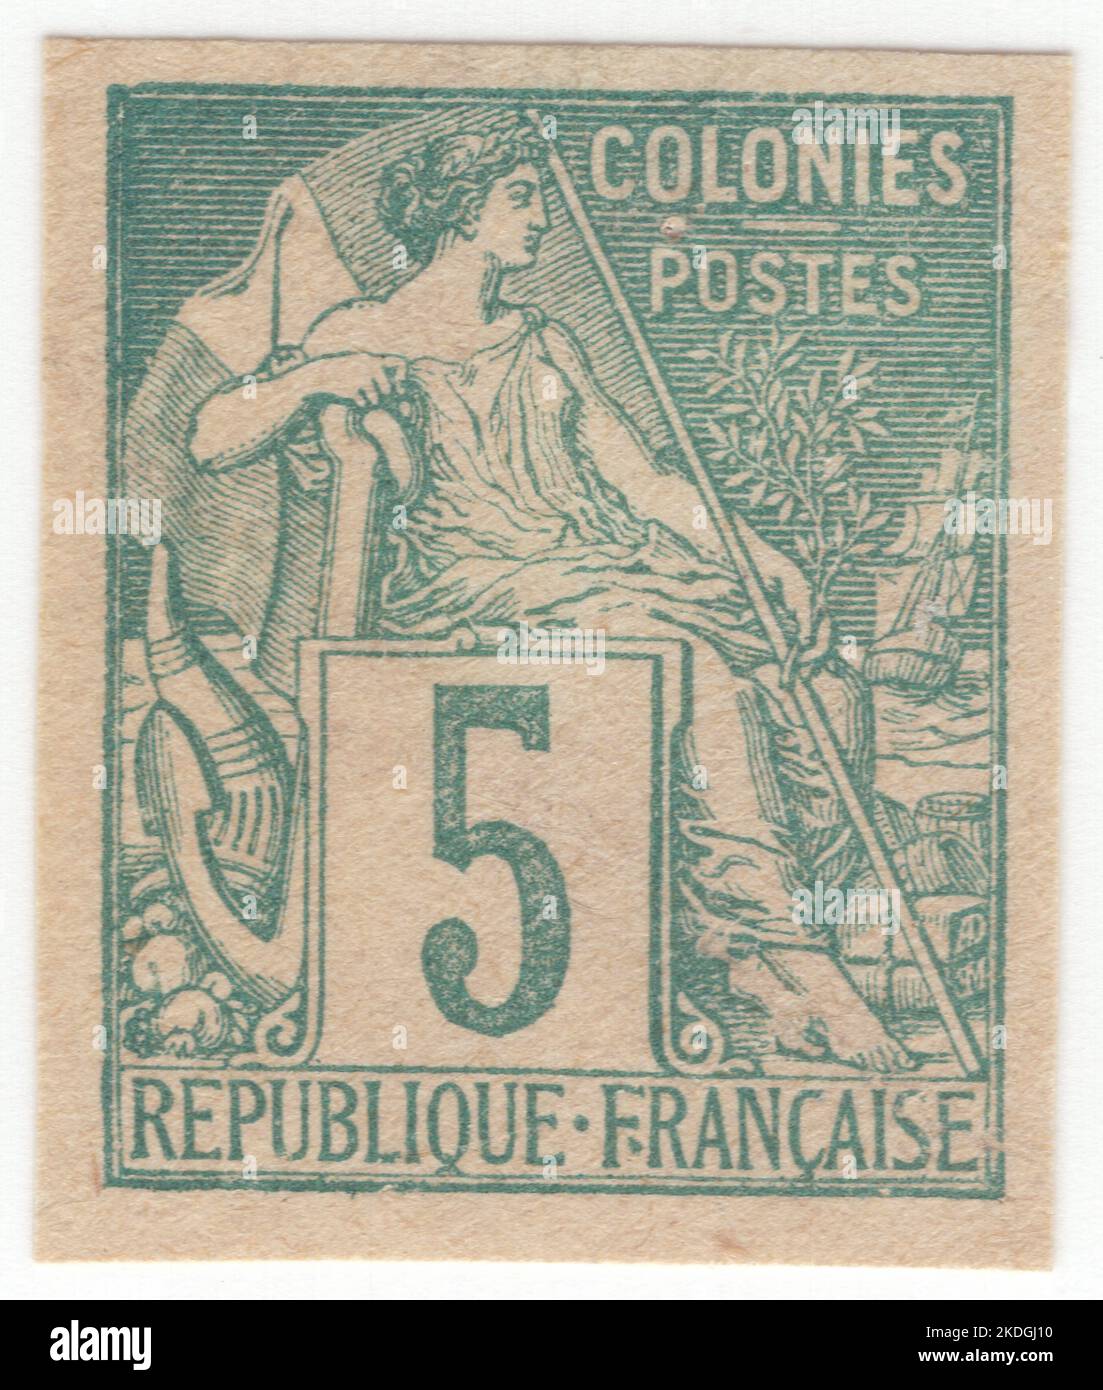 FRENCH COLONIES - 1881: An 5 centimes green on greenish postage stamp depicting allegory female figure 'Commerce' sitting alone and inscribed 'COLONIES'. Series French Colonies by Alphee Dubois Stock Photo